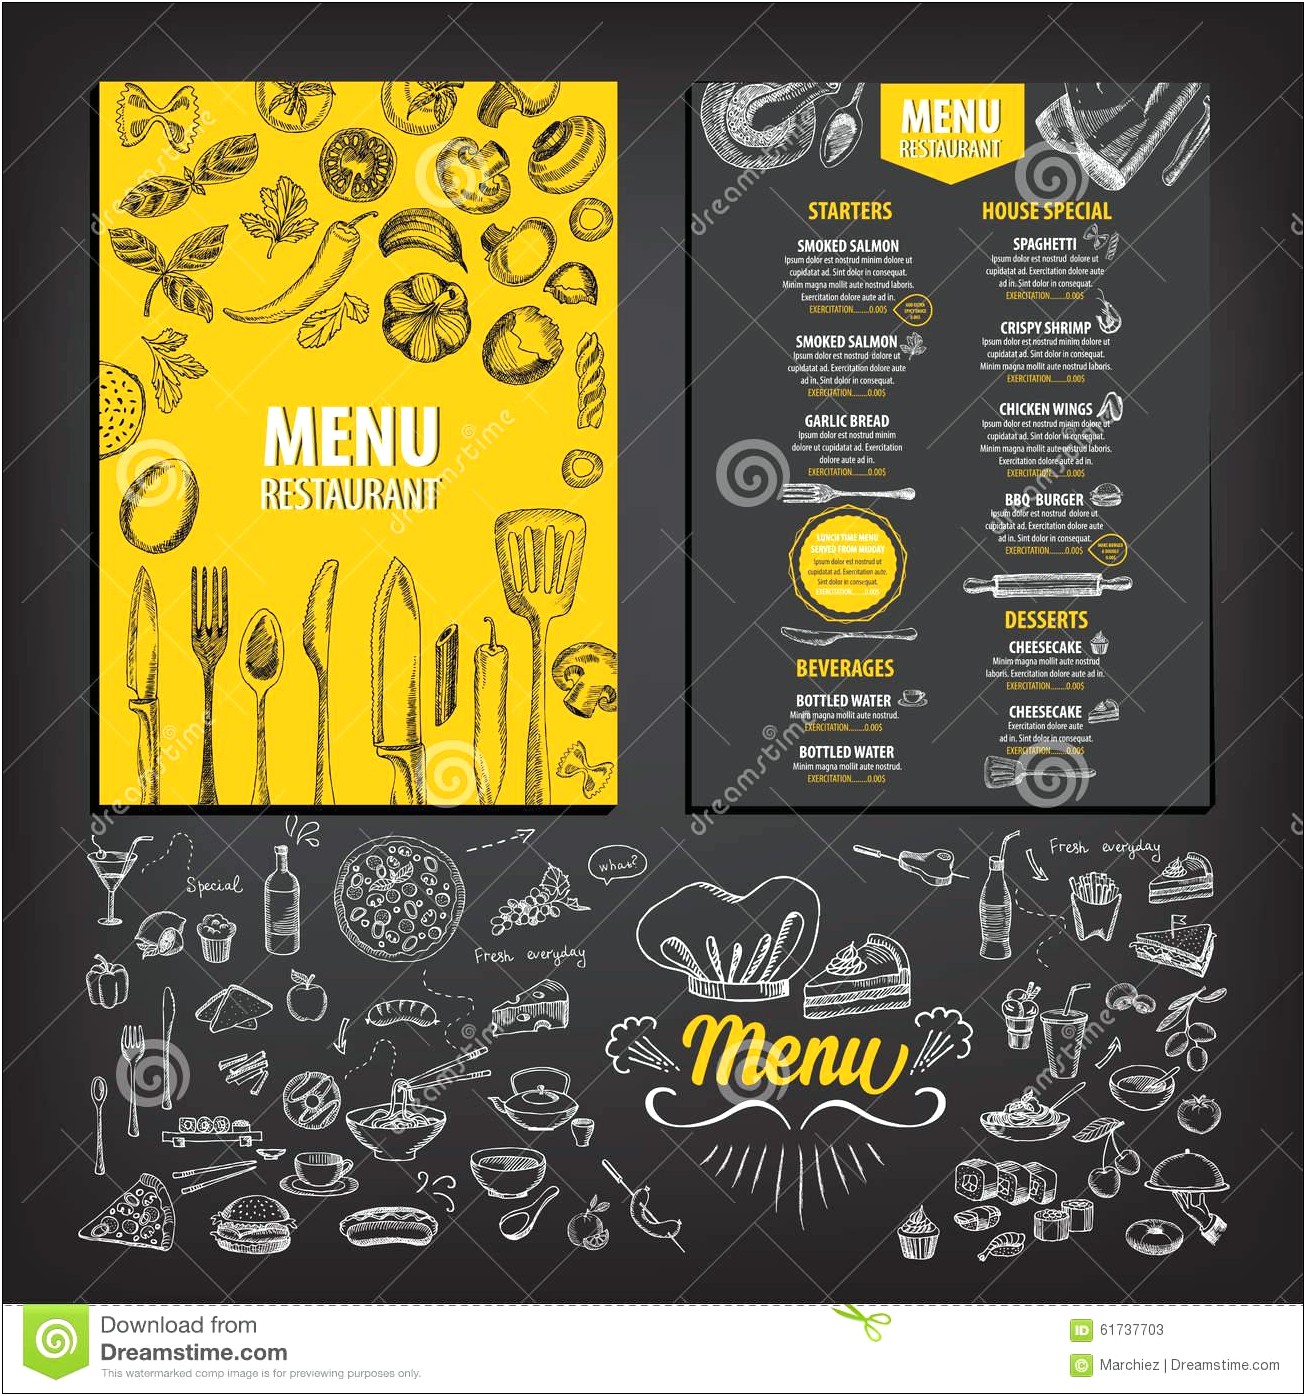 cafe-menu-card-design-templates-free-download-resume-example-gallery